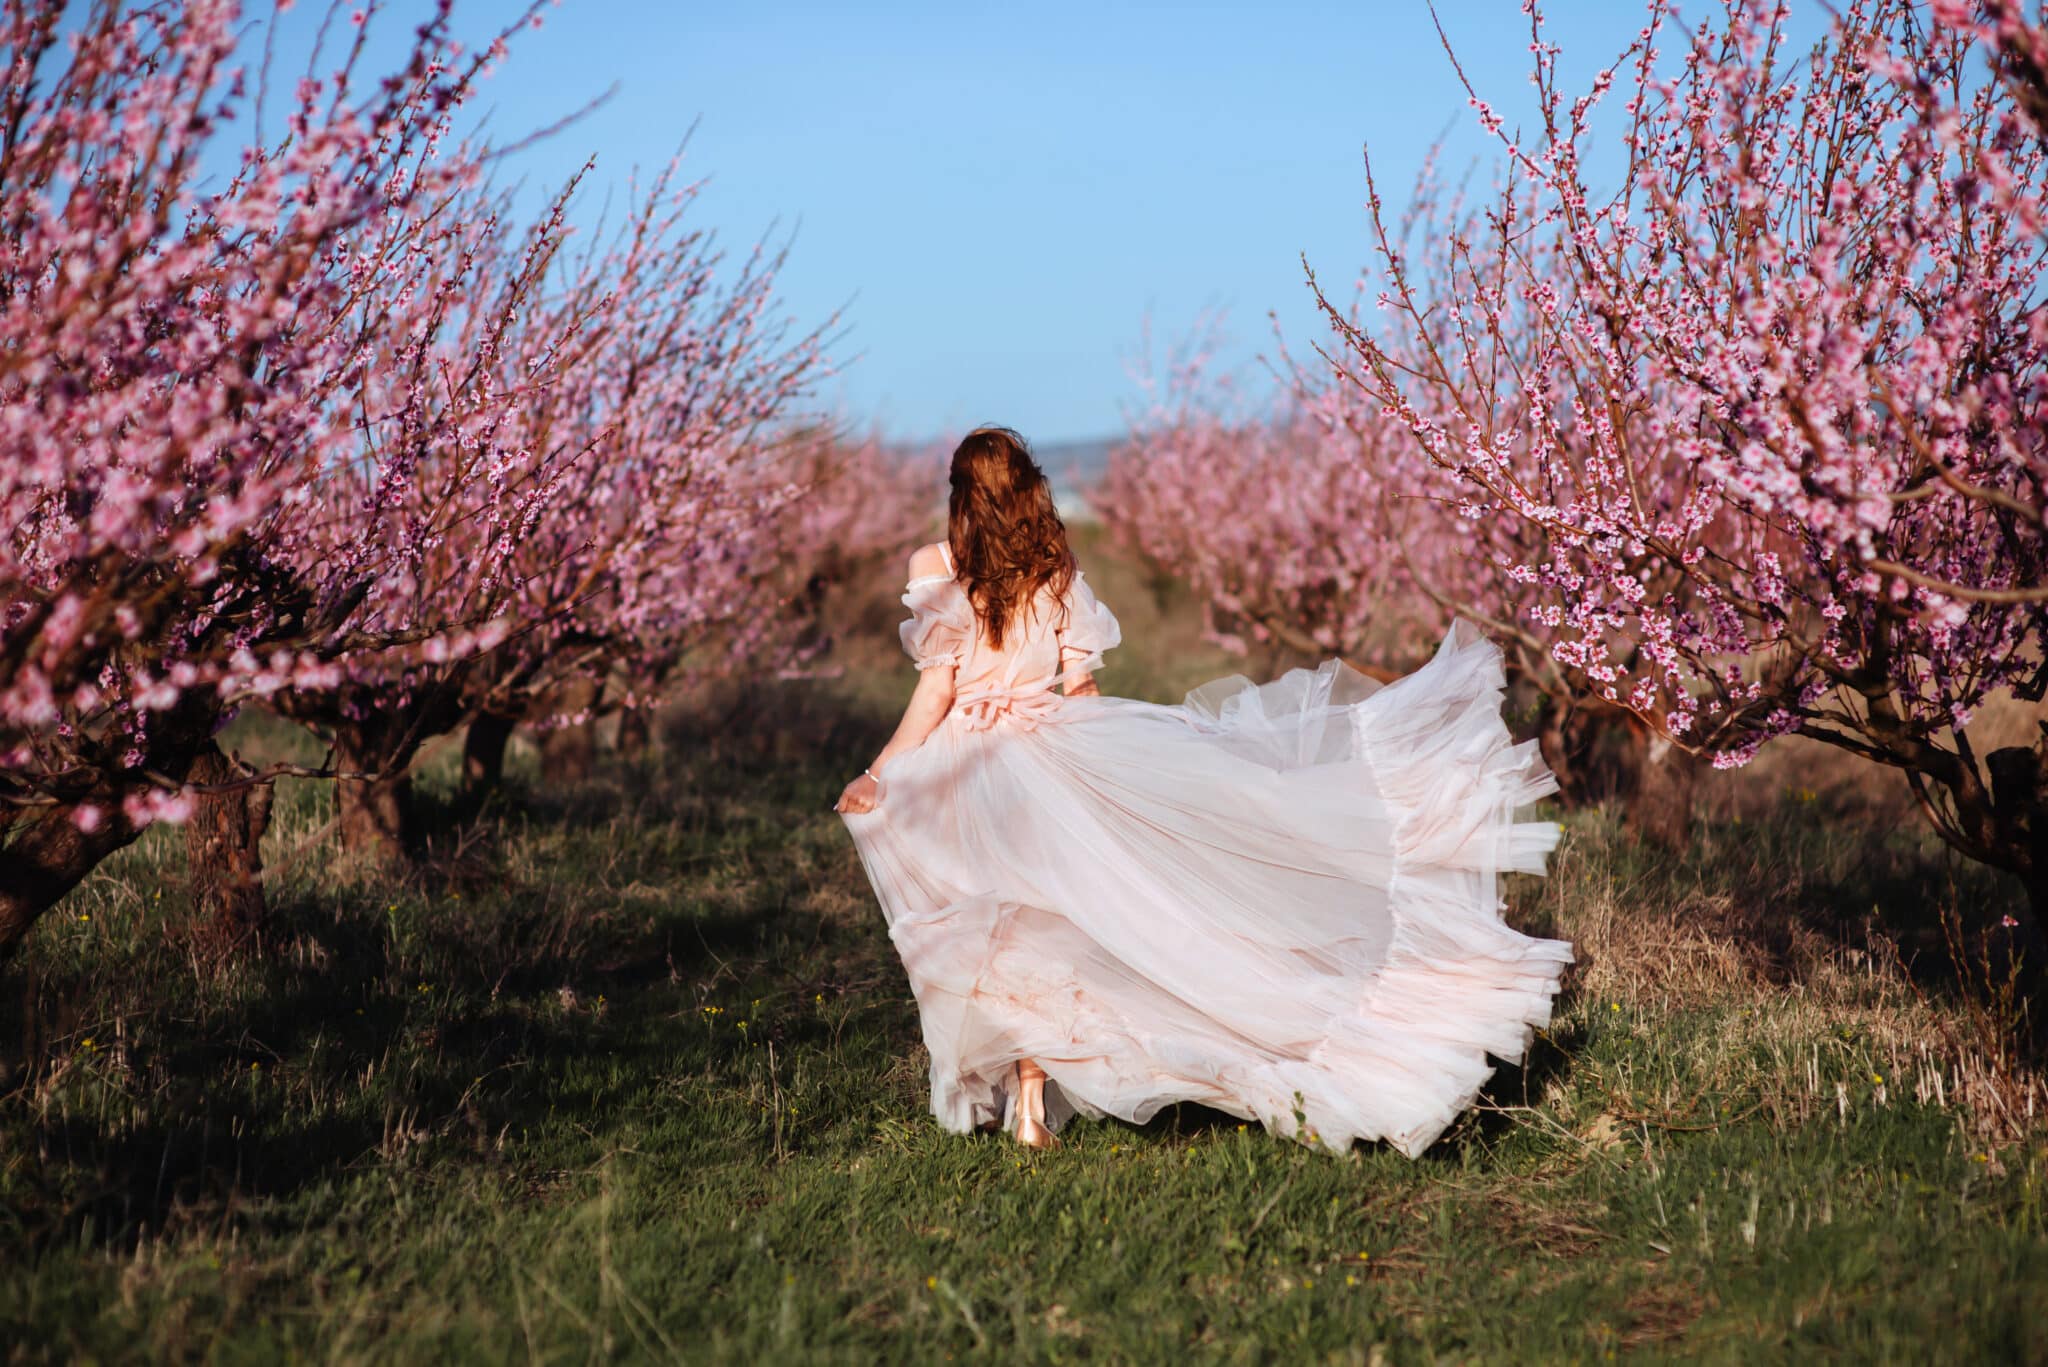 a young girl under the flowering pink tree walking away